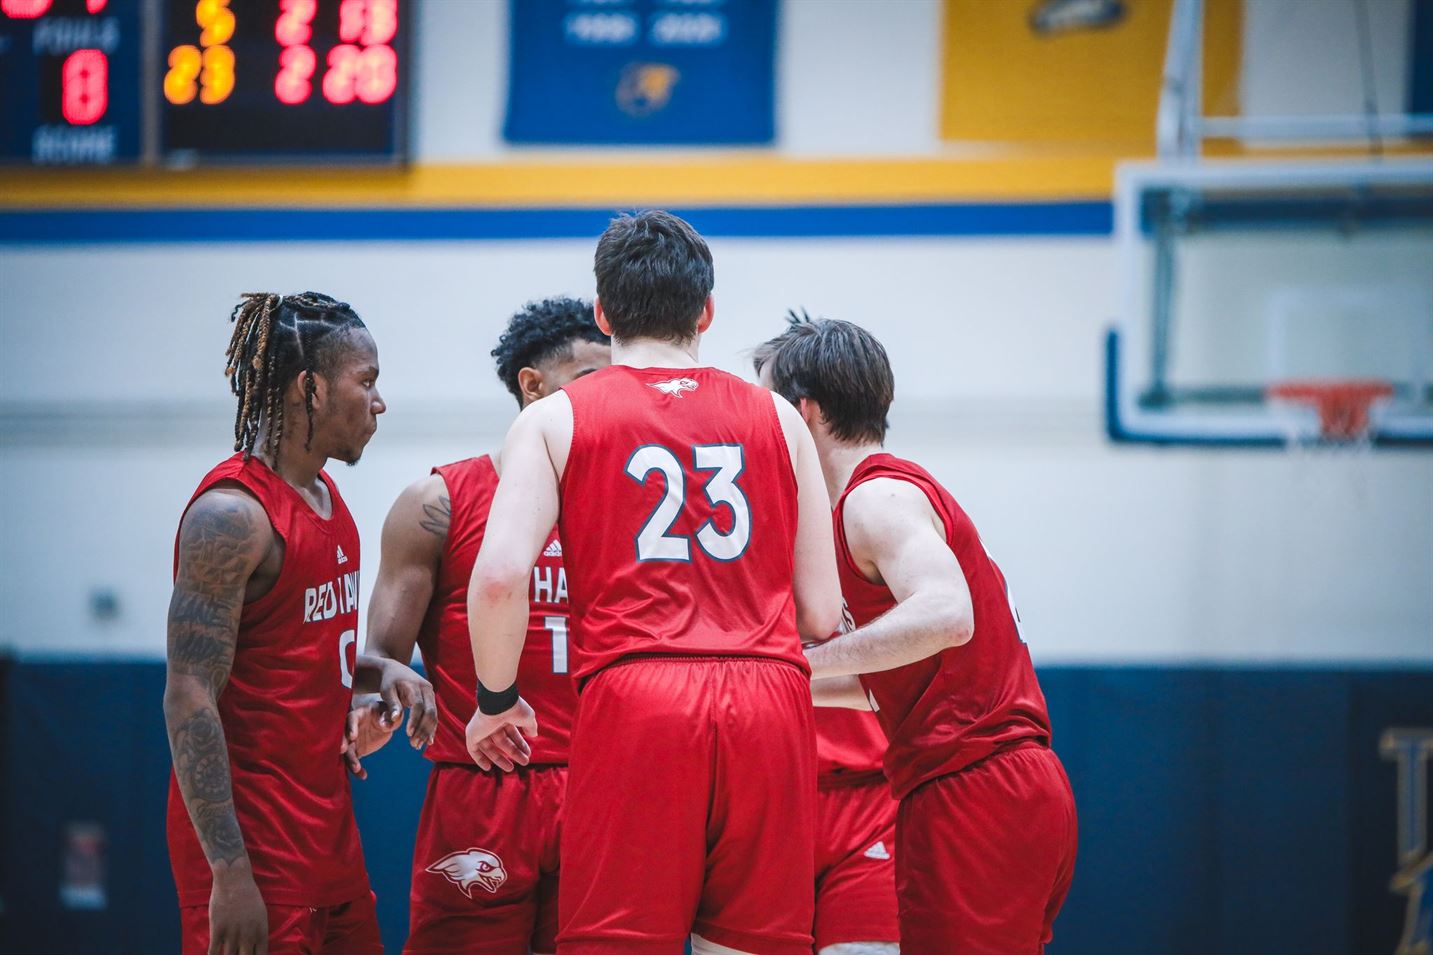 Henry, Pryce, Flanagan and Breeman huddle up on the court during the game. Markell Robinson | The Montclarion